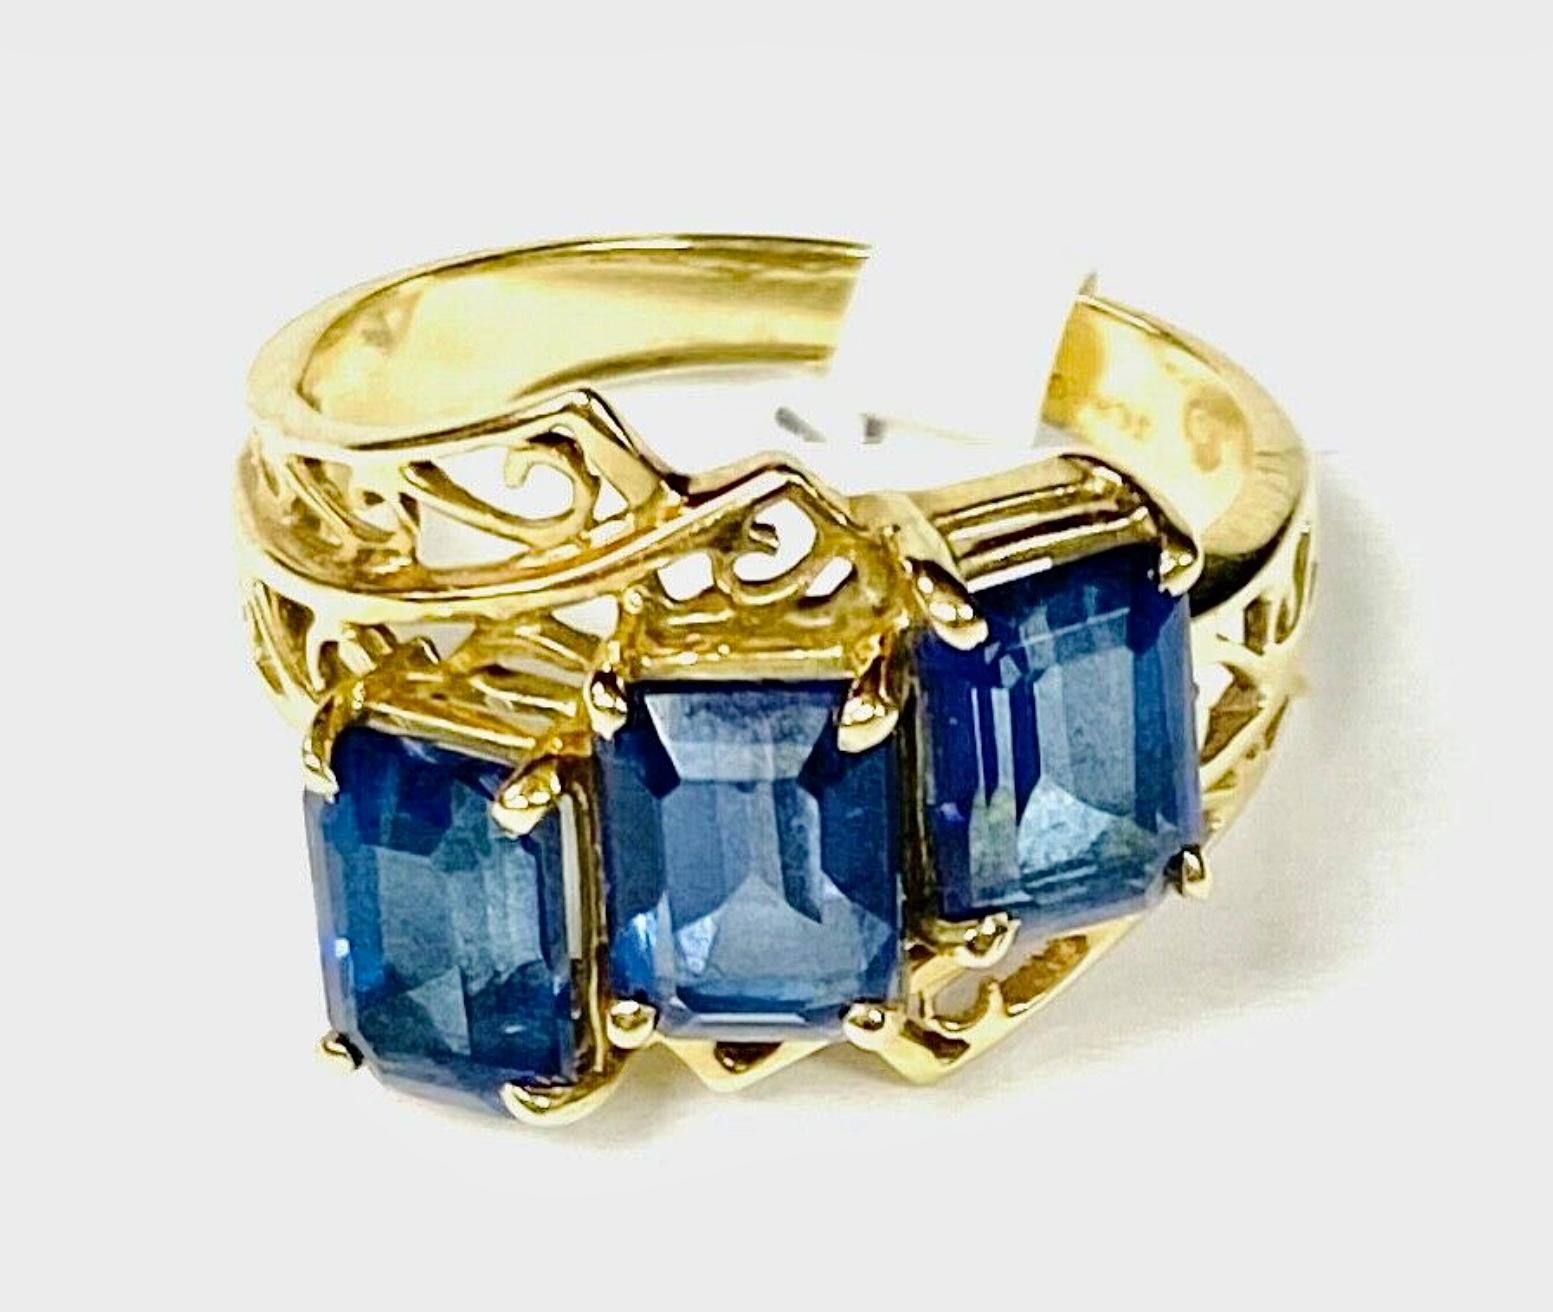 10k yellow gold three stone blue topaz ring, 3.59 Grams TW. The dimensions of the emerald cut stones are approximately 6 x 4.5 mm each. Approximately 0.75 carats each or a total of approximately 2.25 carats. Marked 10k. Approximate size 7.
